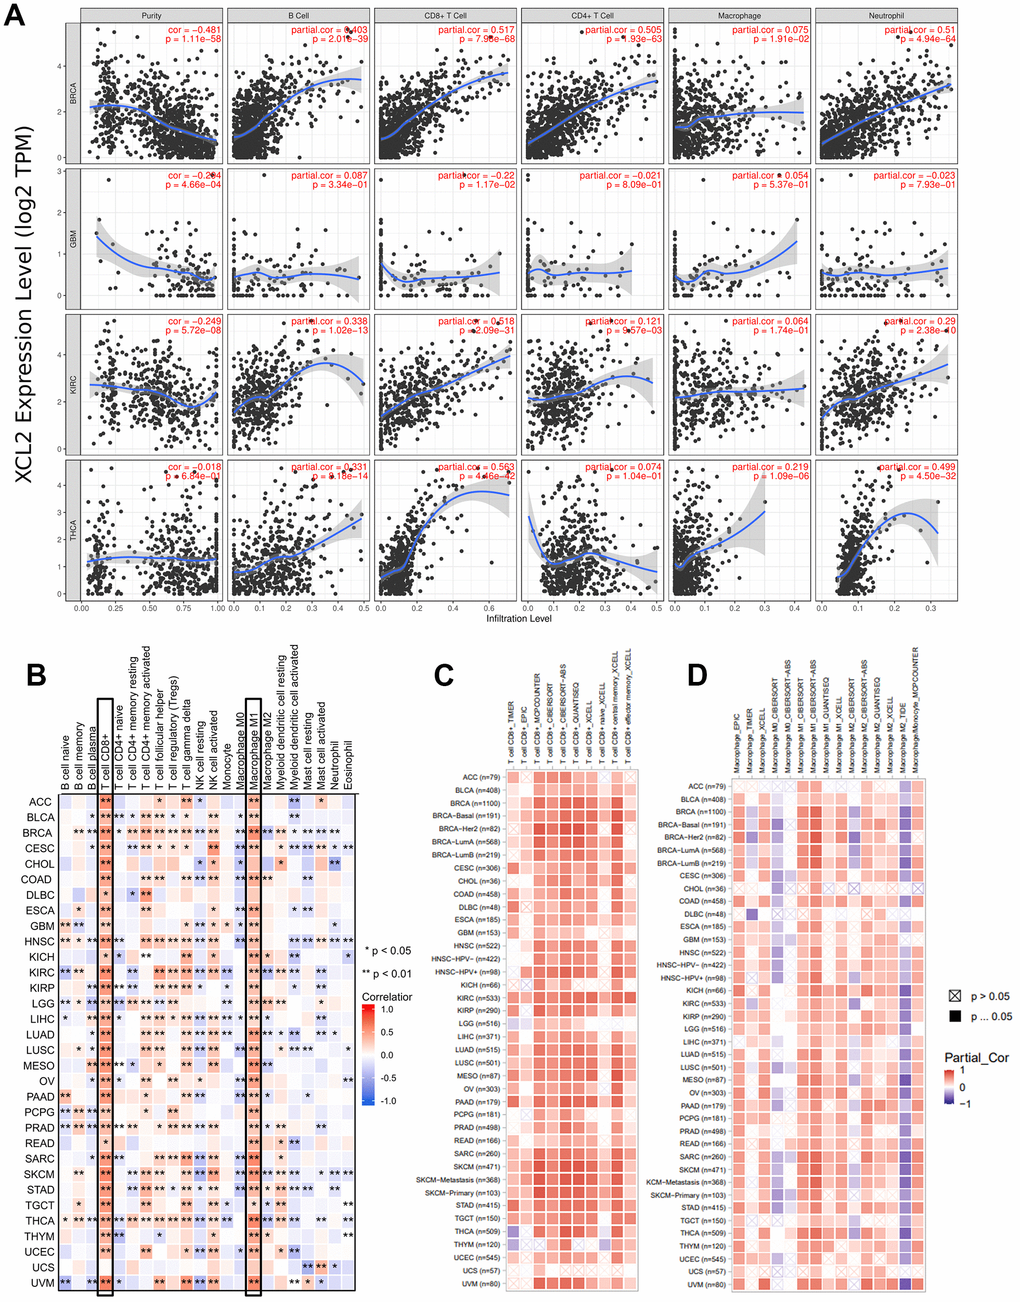 Analysis between the XCL2 expression and immune cell infiltration. (A) TIMER2.0 database was used to exhibit the correlations between XCL2 expression and immune cells (B, CD4+ T, CD8+ T, macrophages, neutrophils); (B) Positive correlation between CD8 T cells and macrophages M1 and XCL2 expression in pan-cancer under the CIBERSORT calculation method; (C) CD8 T cells show a strong positive correlation with XCL2 expression in the majority of cancers; (D) Correlation between various subtypes of macrophages and XCL2 expression under different algorithms (*P 